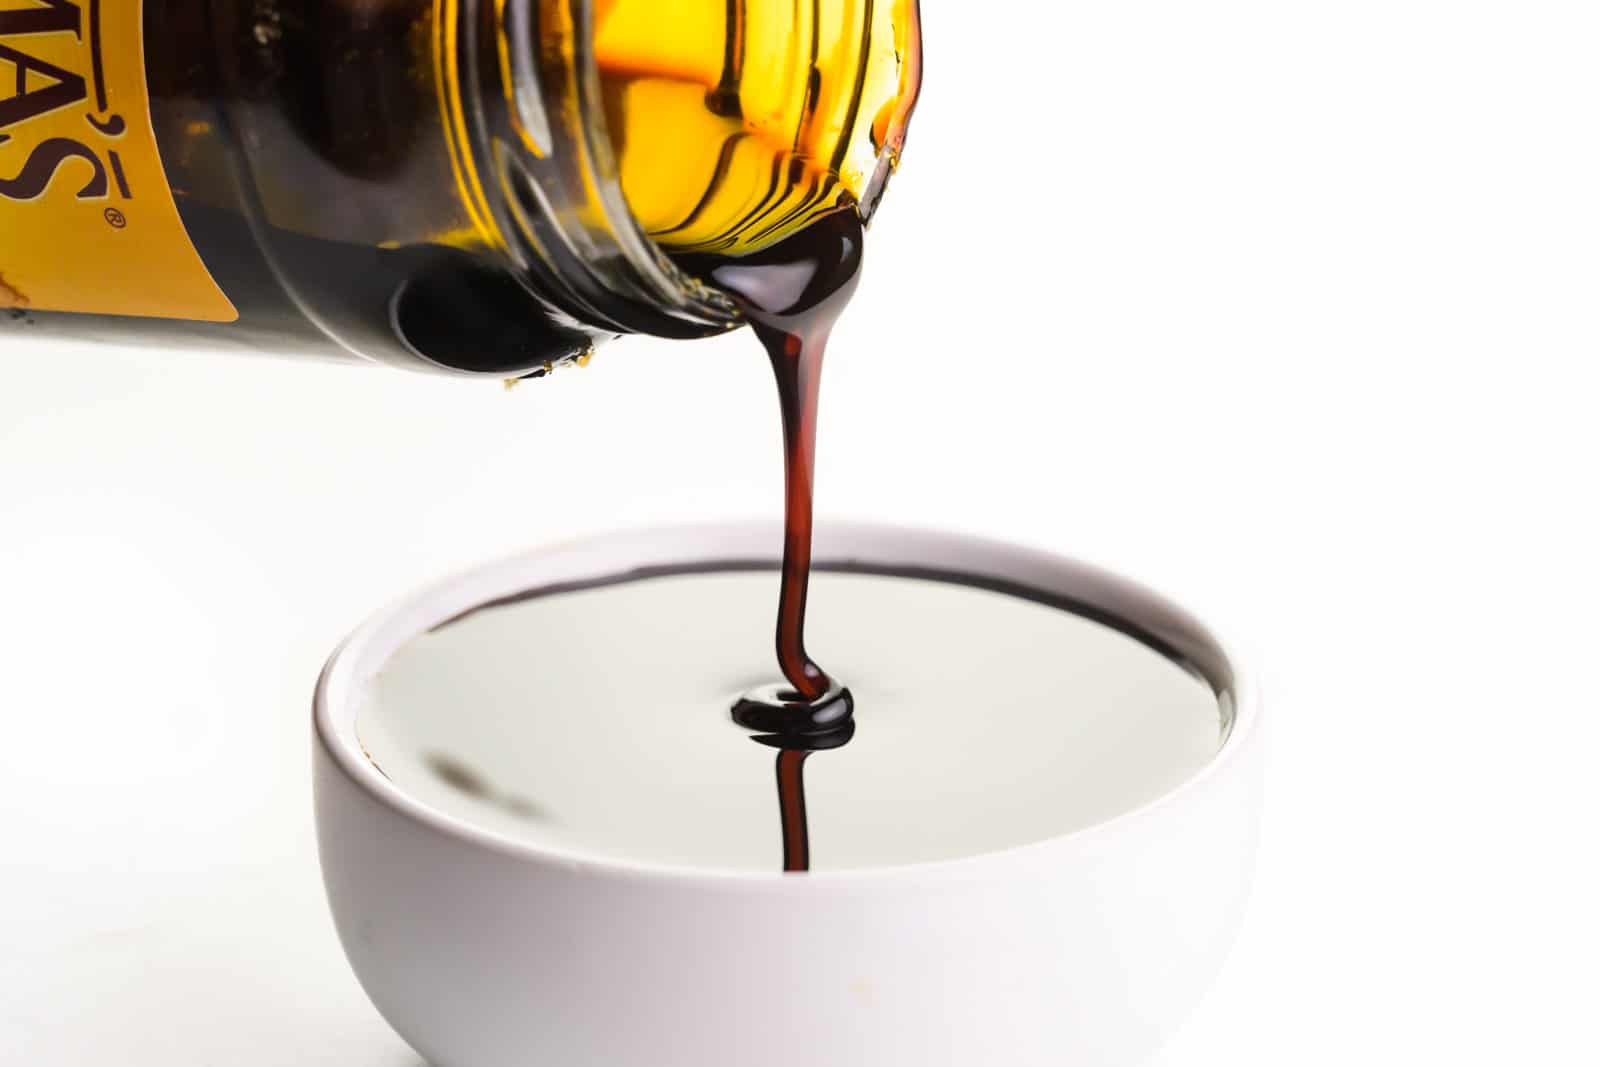 A jar of molasses is pouring into a small white bowl